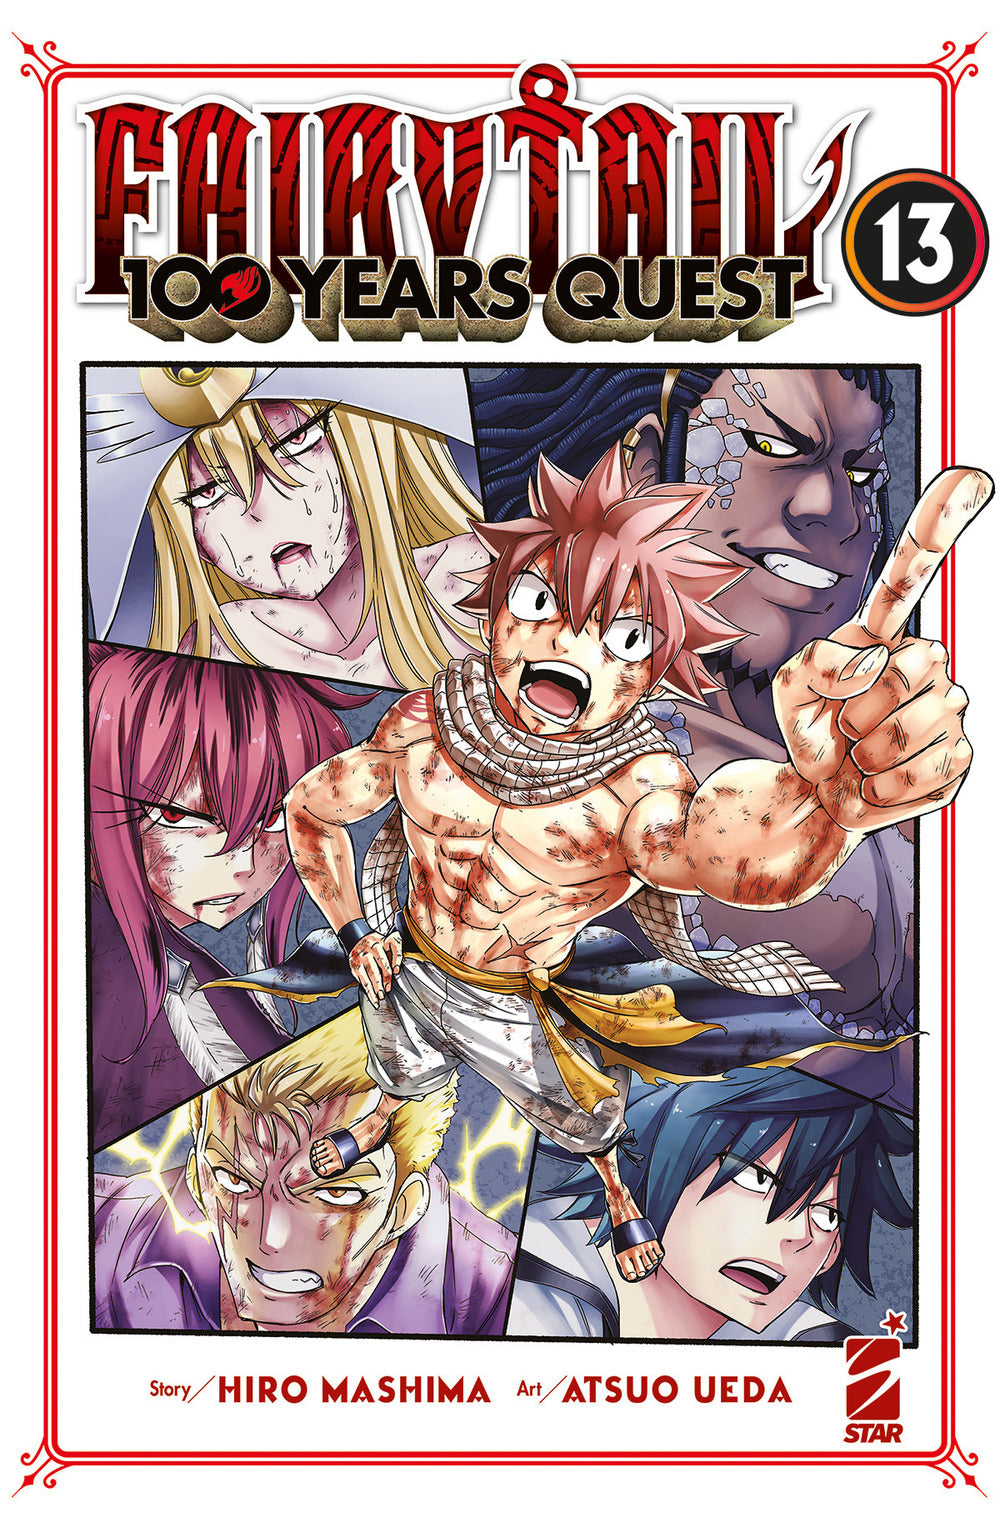 Fairy Tail. 100 years quest. Vol. 13